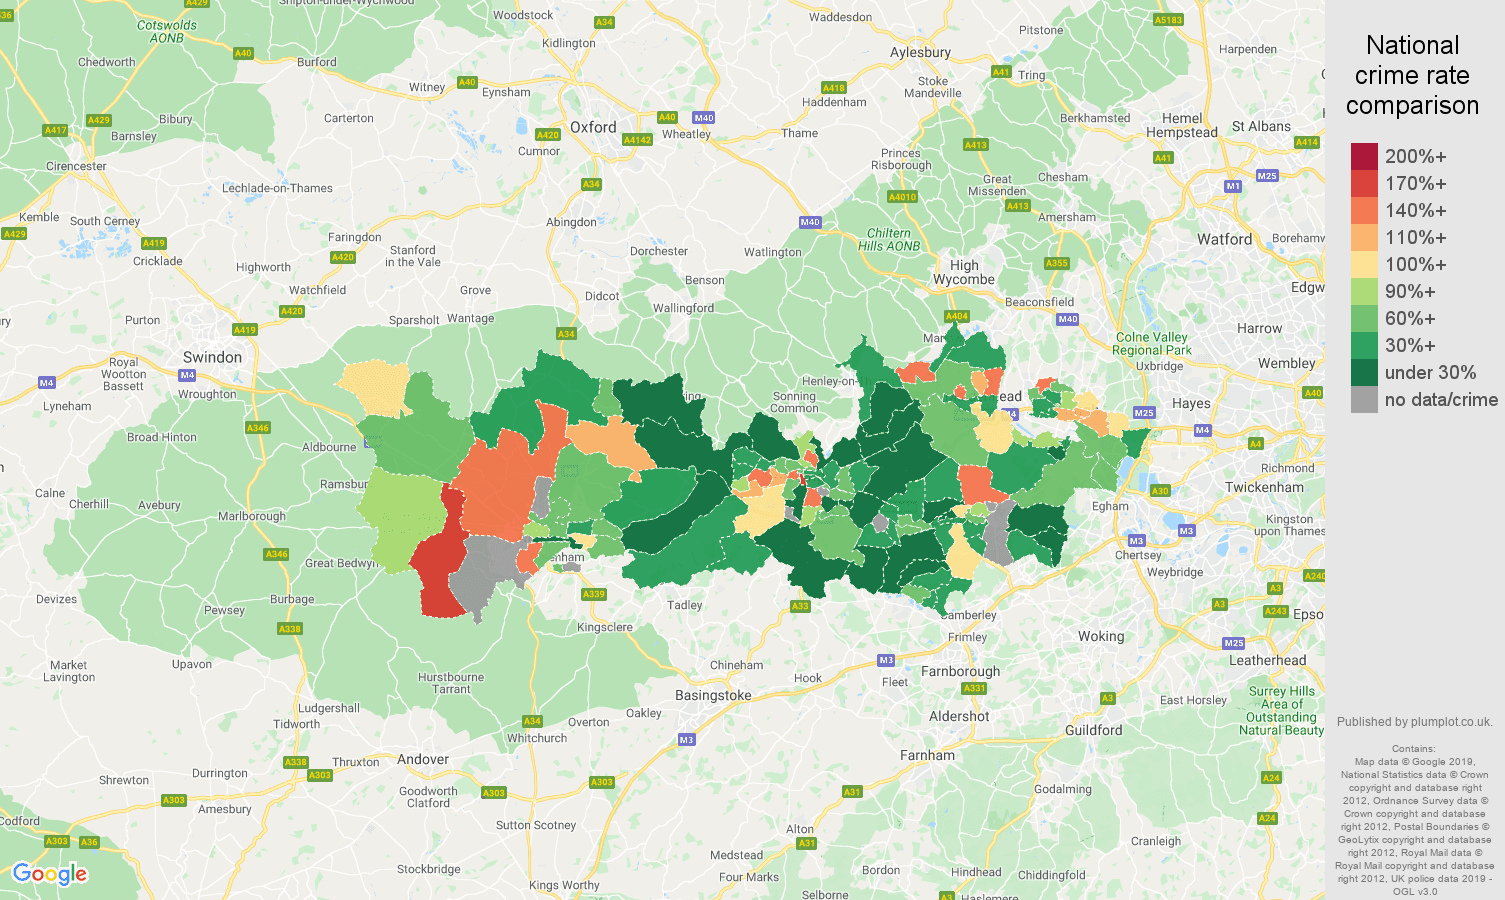 Berkshire other crime rate comparison map